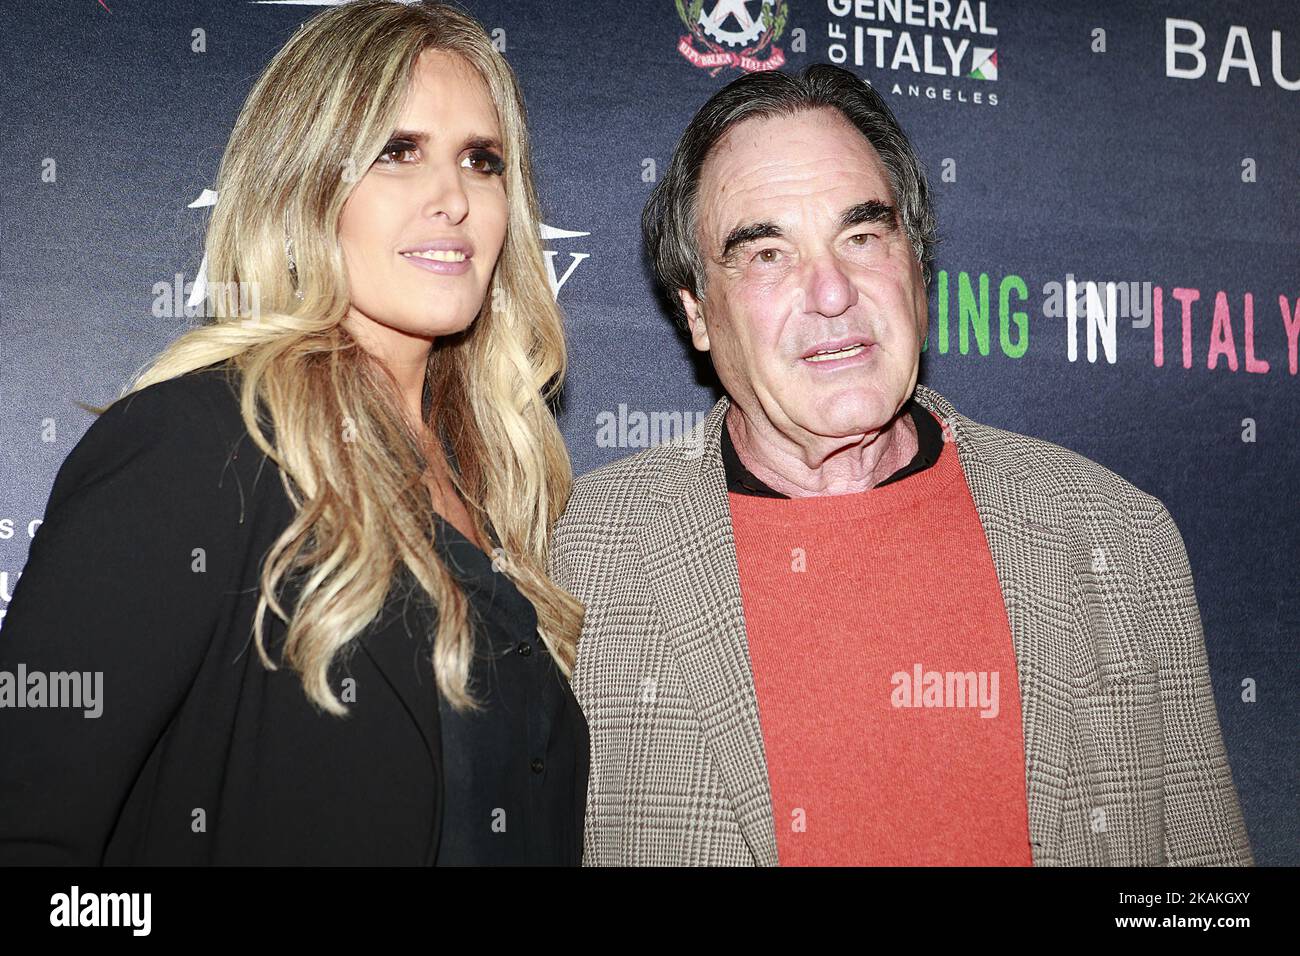 Filming on Italy Executive Director Tiziana Rocca and Director Oliver Stone (R) on the red carpet prior Mr. Stone receiving the 'Baume & Mercier Special Filming on Italy Award' at Italian Cultural Institute in Los Angeles, CA on February 3, 2017 (Photo by Neca Dantas/NurPhoto) *** Please Use Credit from Credit Field *** Stock Photo